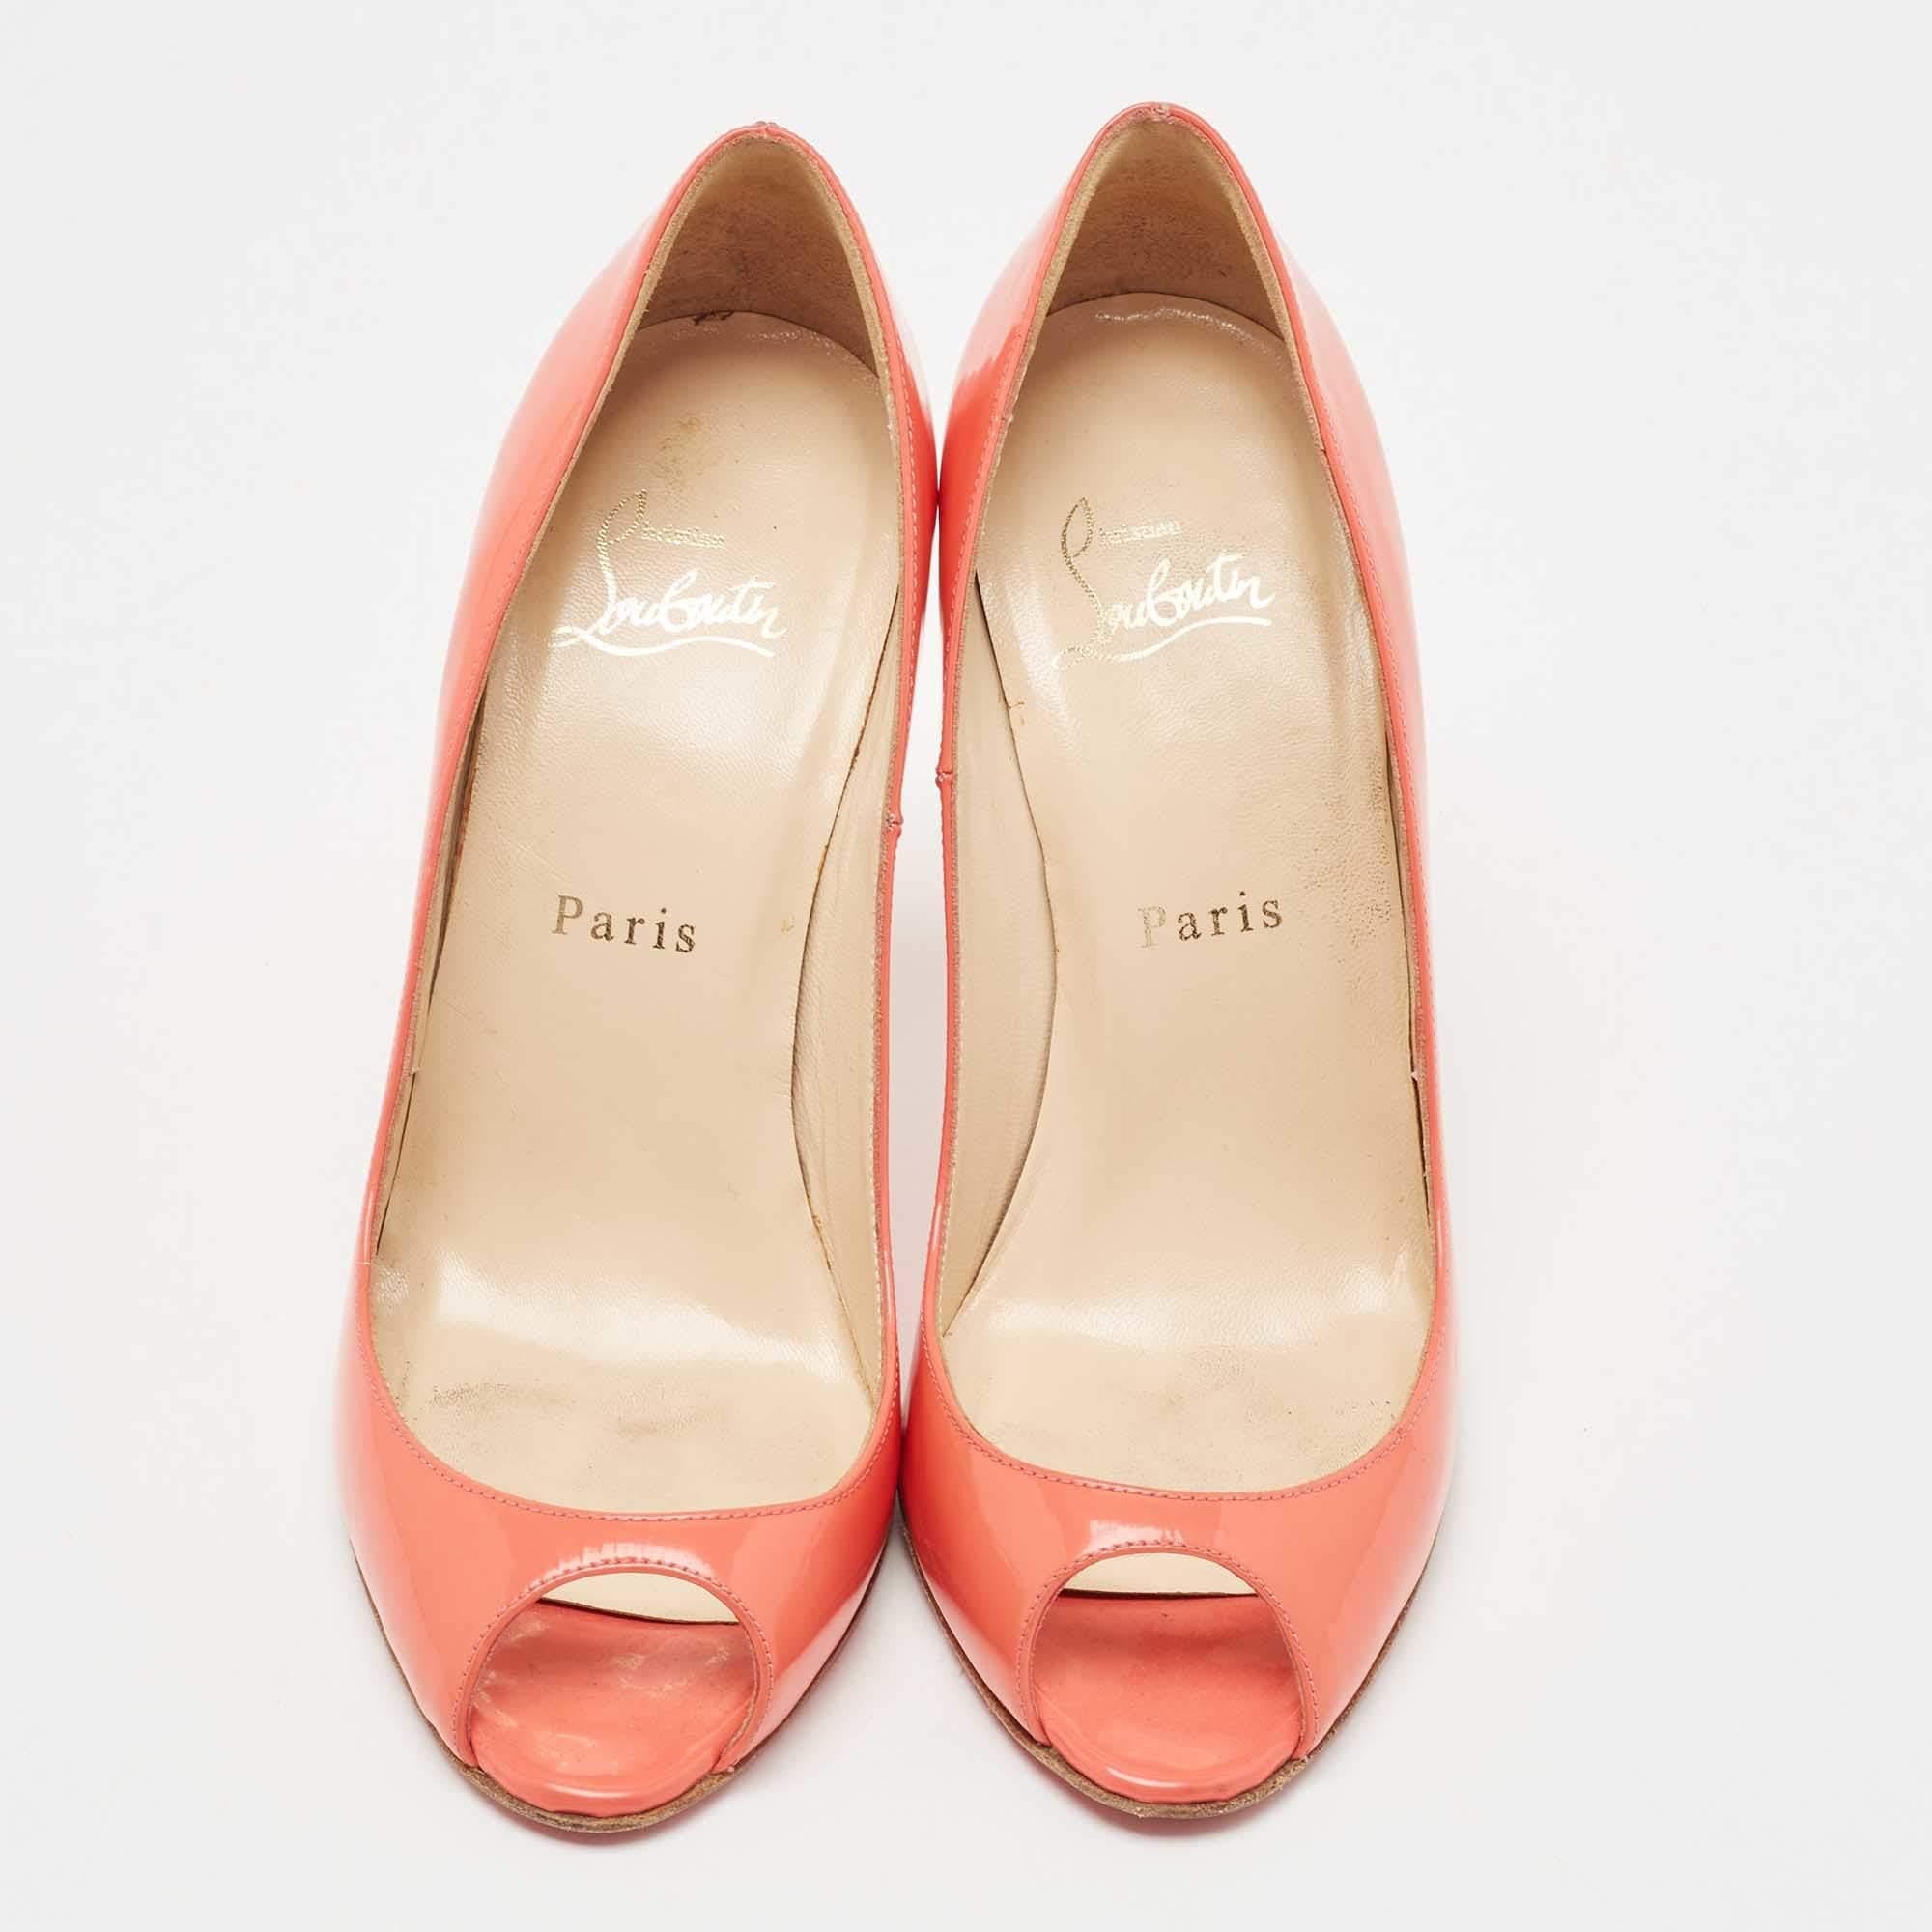 Orange Christian Louboutin Pink Patent Leather Flo Pumps Size 37 For Sale